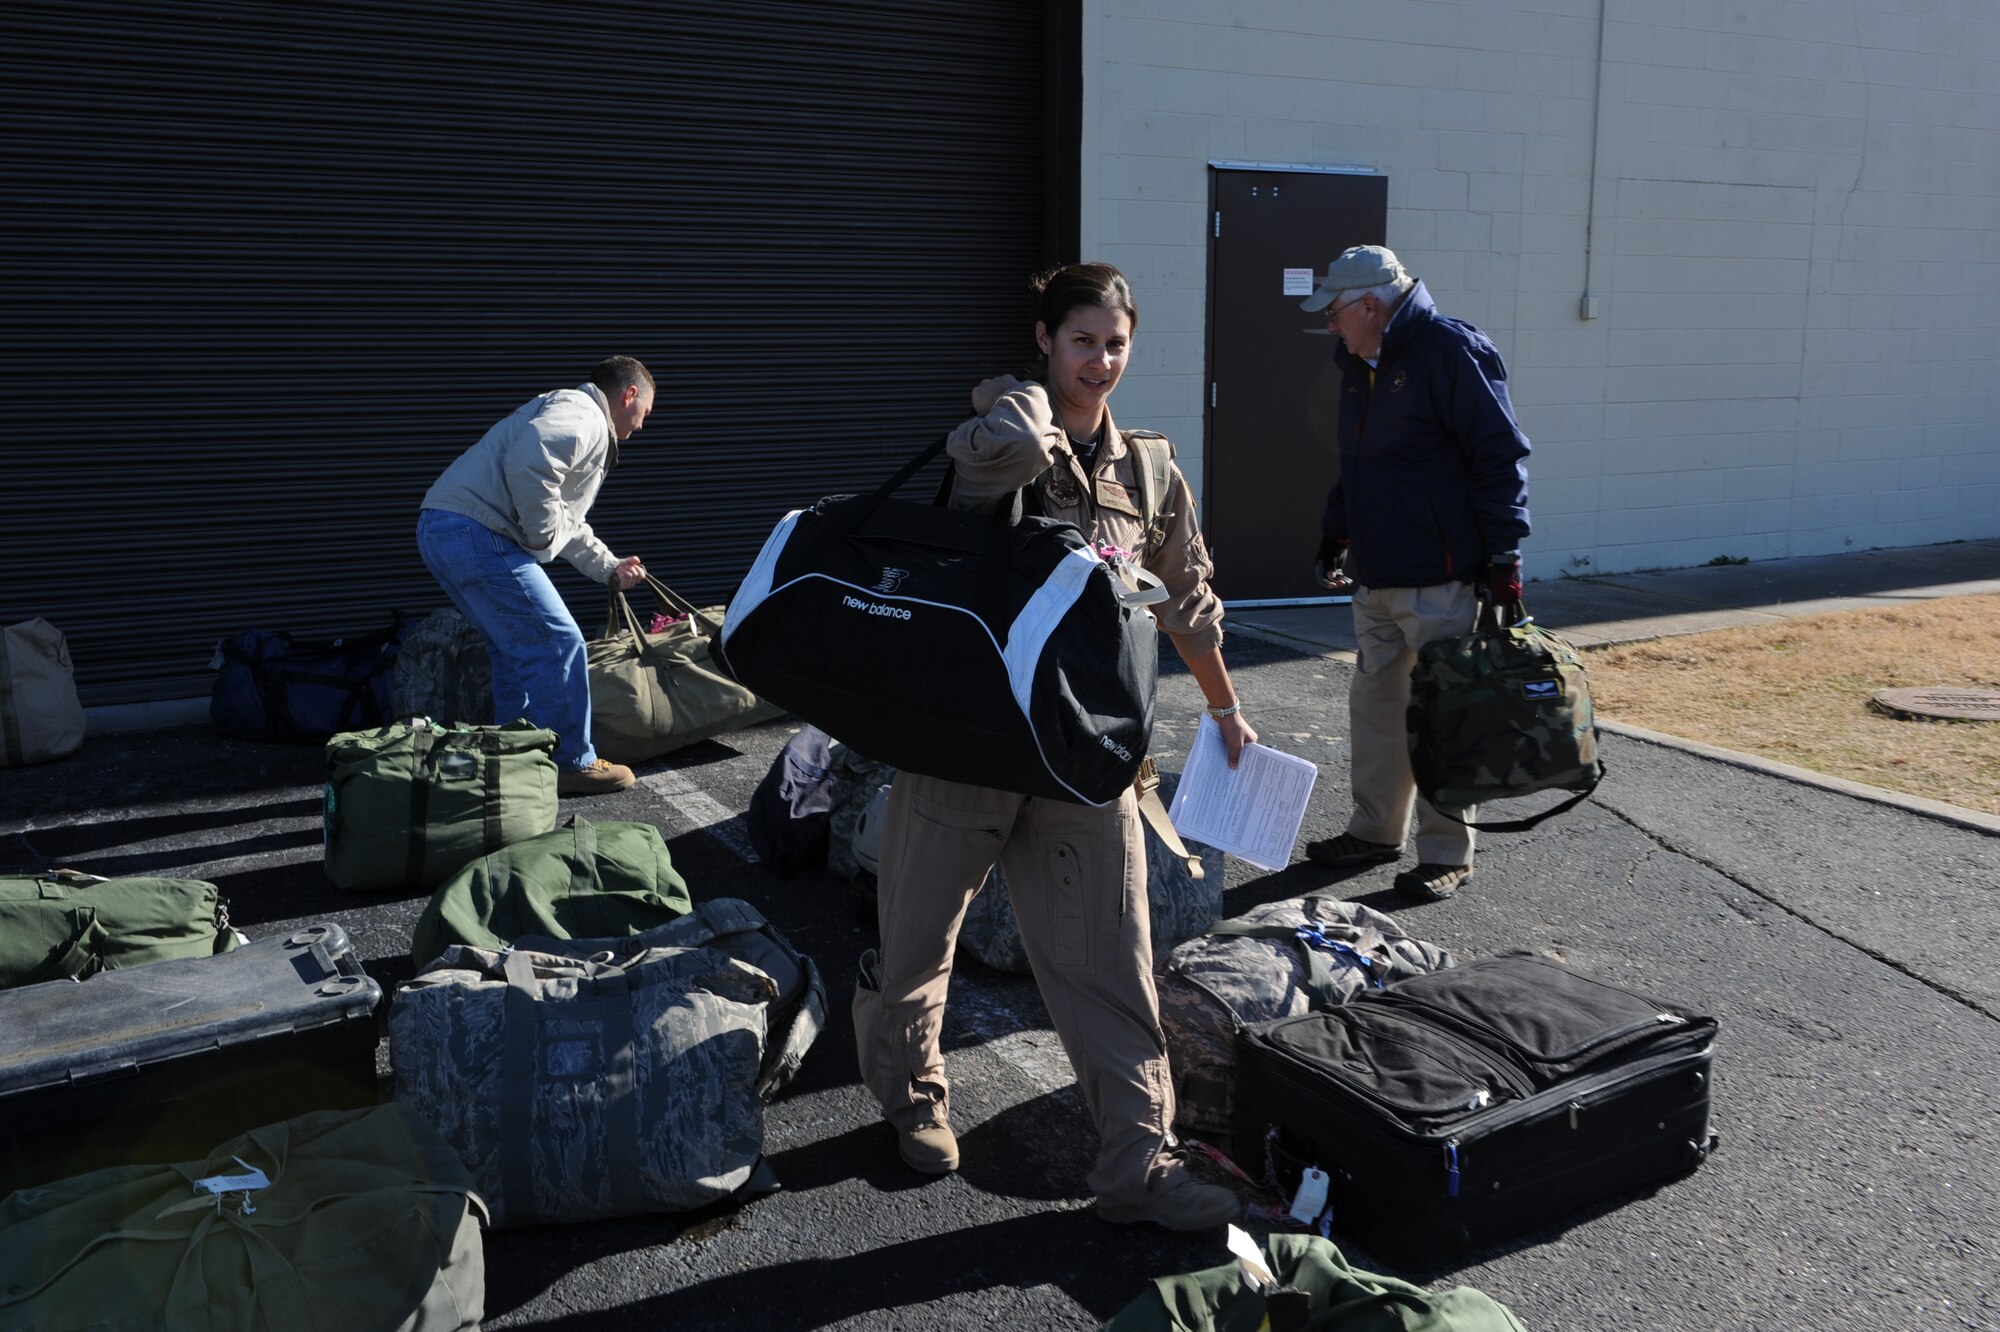 Capt. Carrie Donohue, a 53rd Airlift Squadron navigation instructor, retrieves her bags after returning from her deployment Dec. 25 at Bldg. 430. Nearly 160 Airmen returned home Christmas Day. (U.S. Air Force photo by Senior Airman Ethan Morgan)